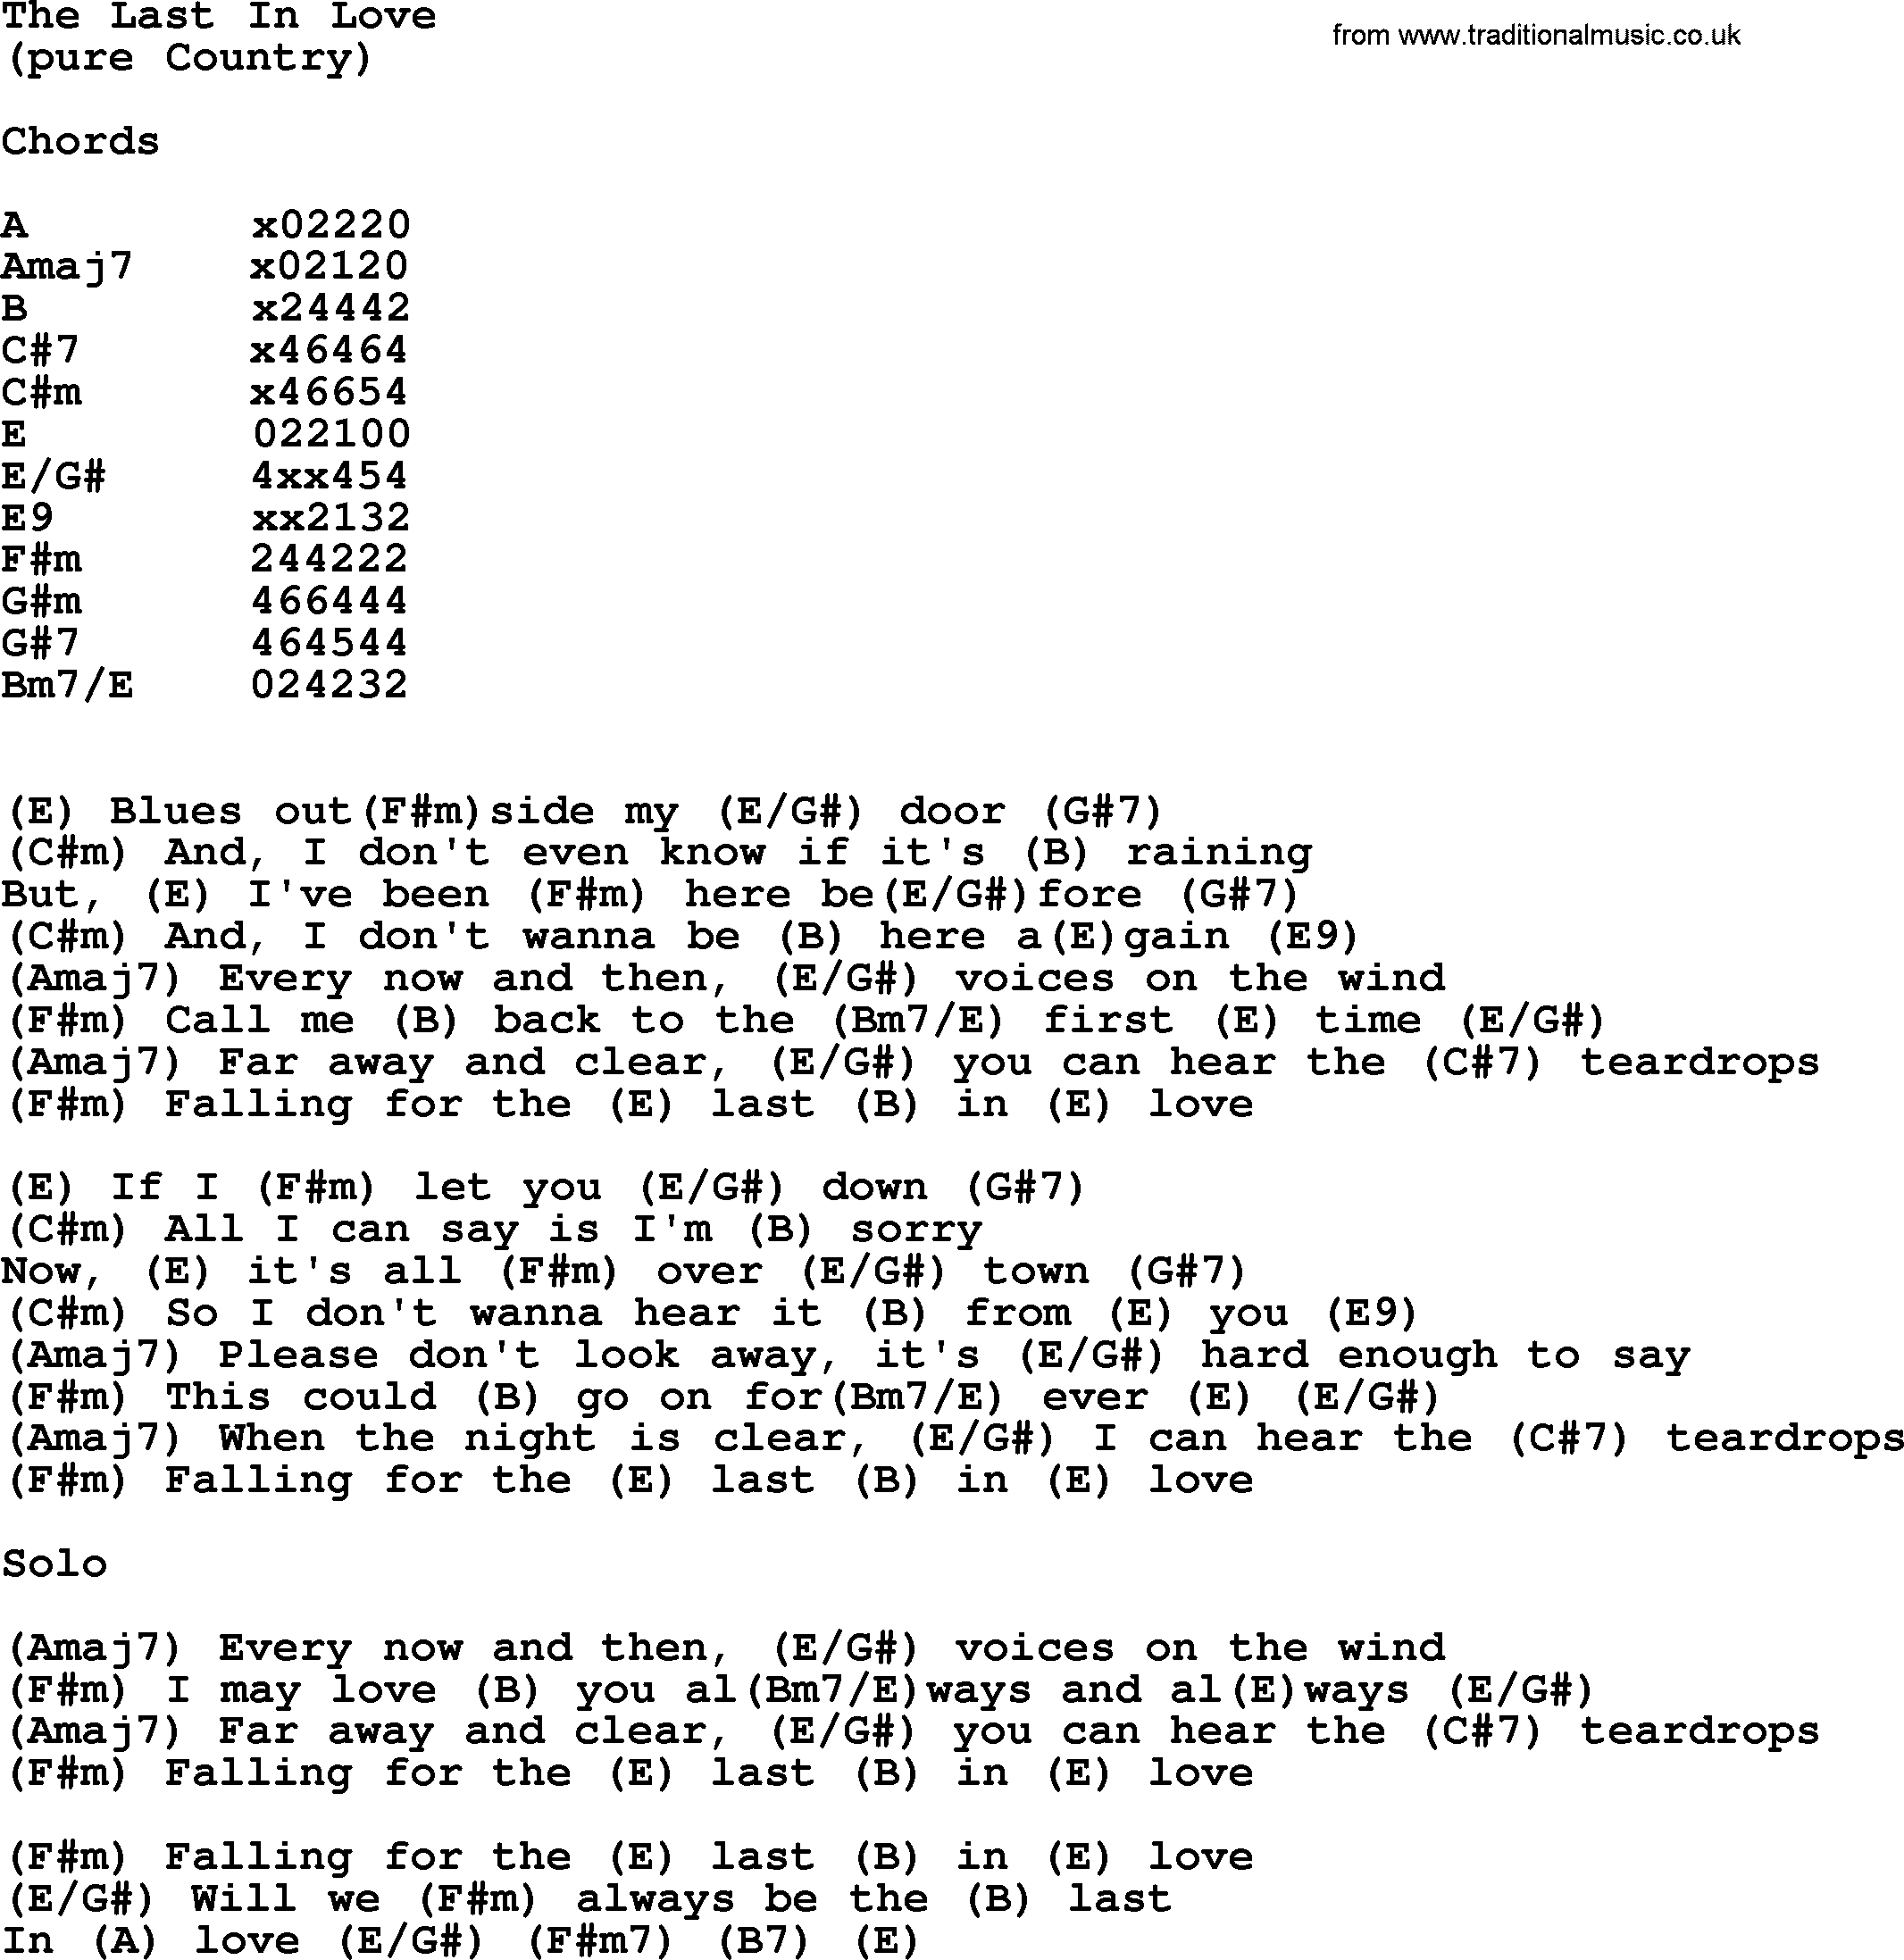 George Strait song: The Last In Love, lyrics and chords